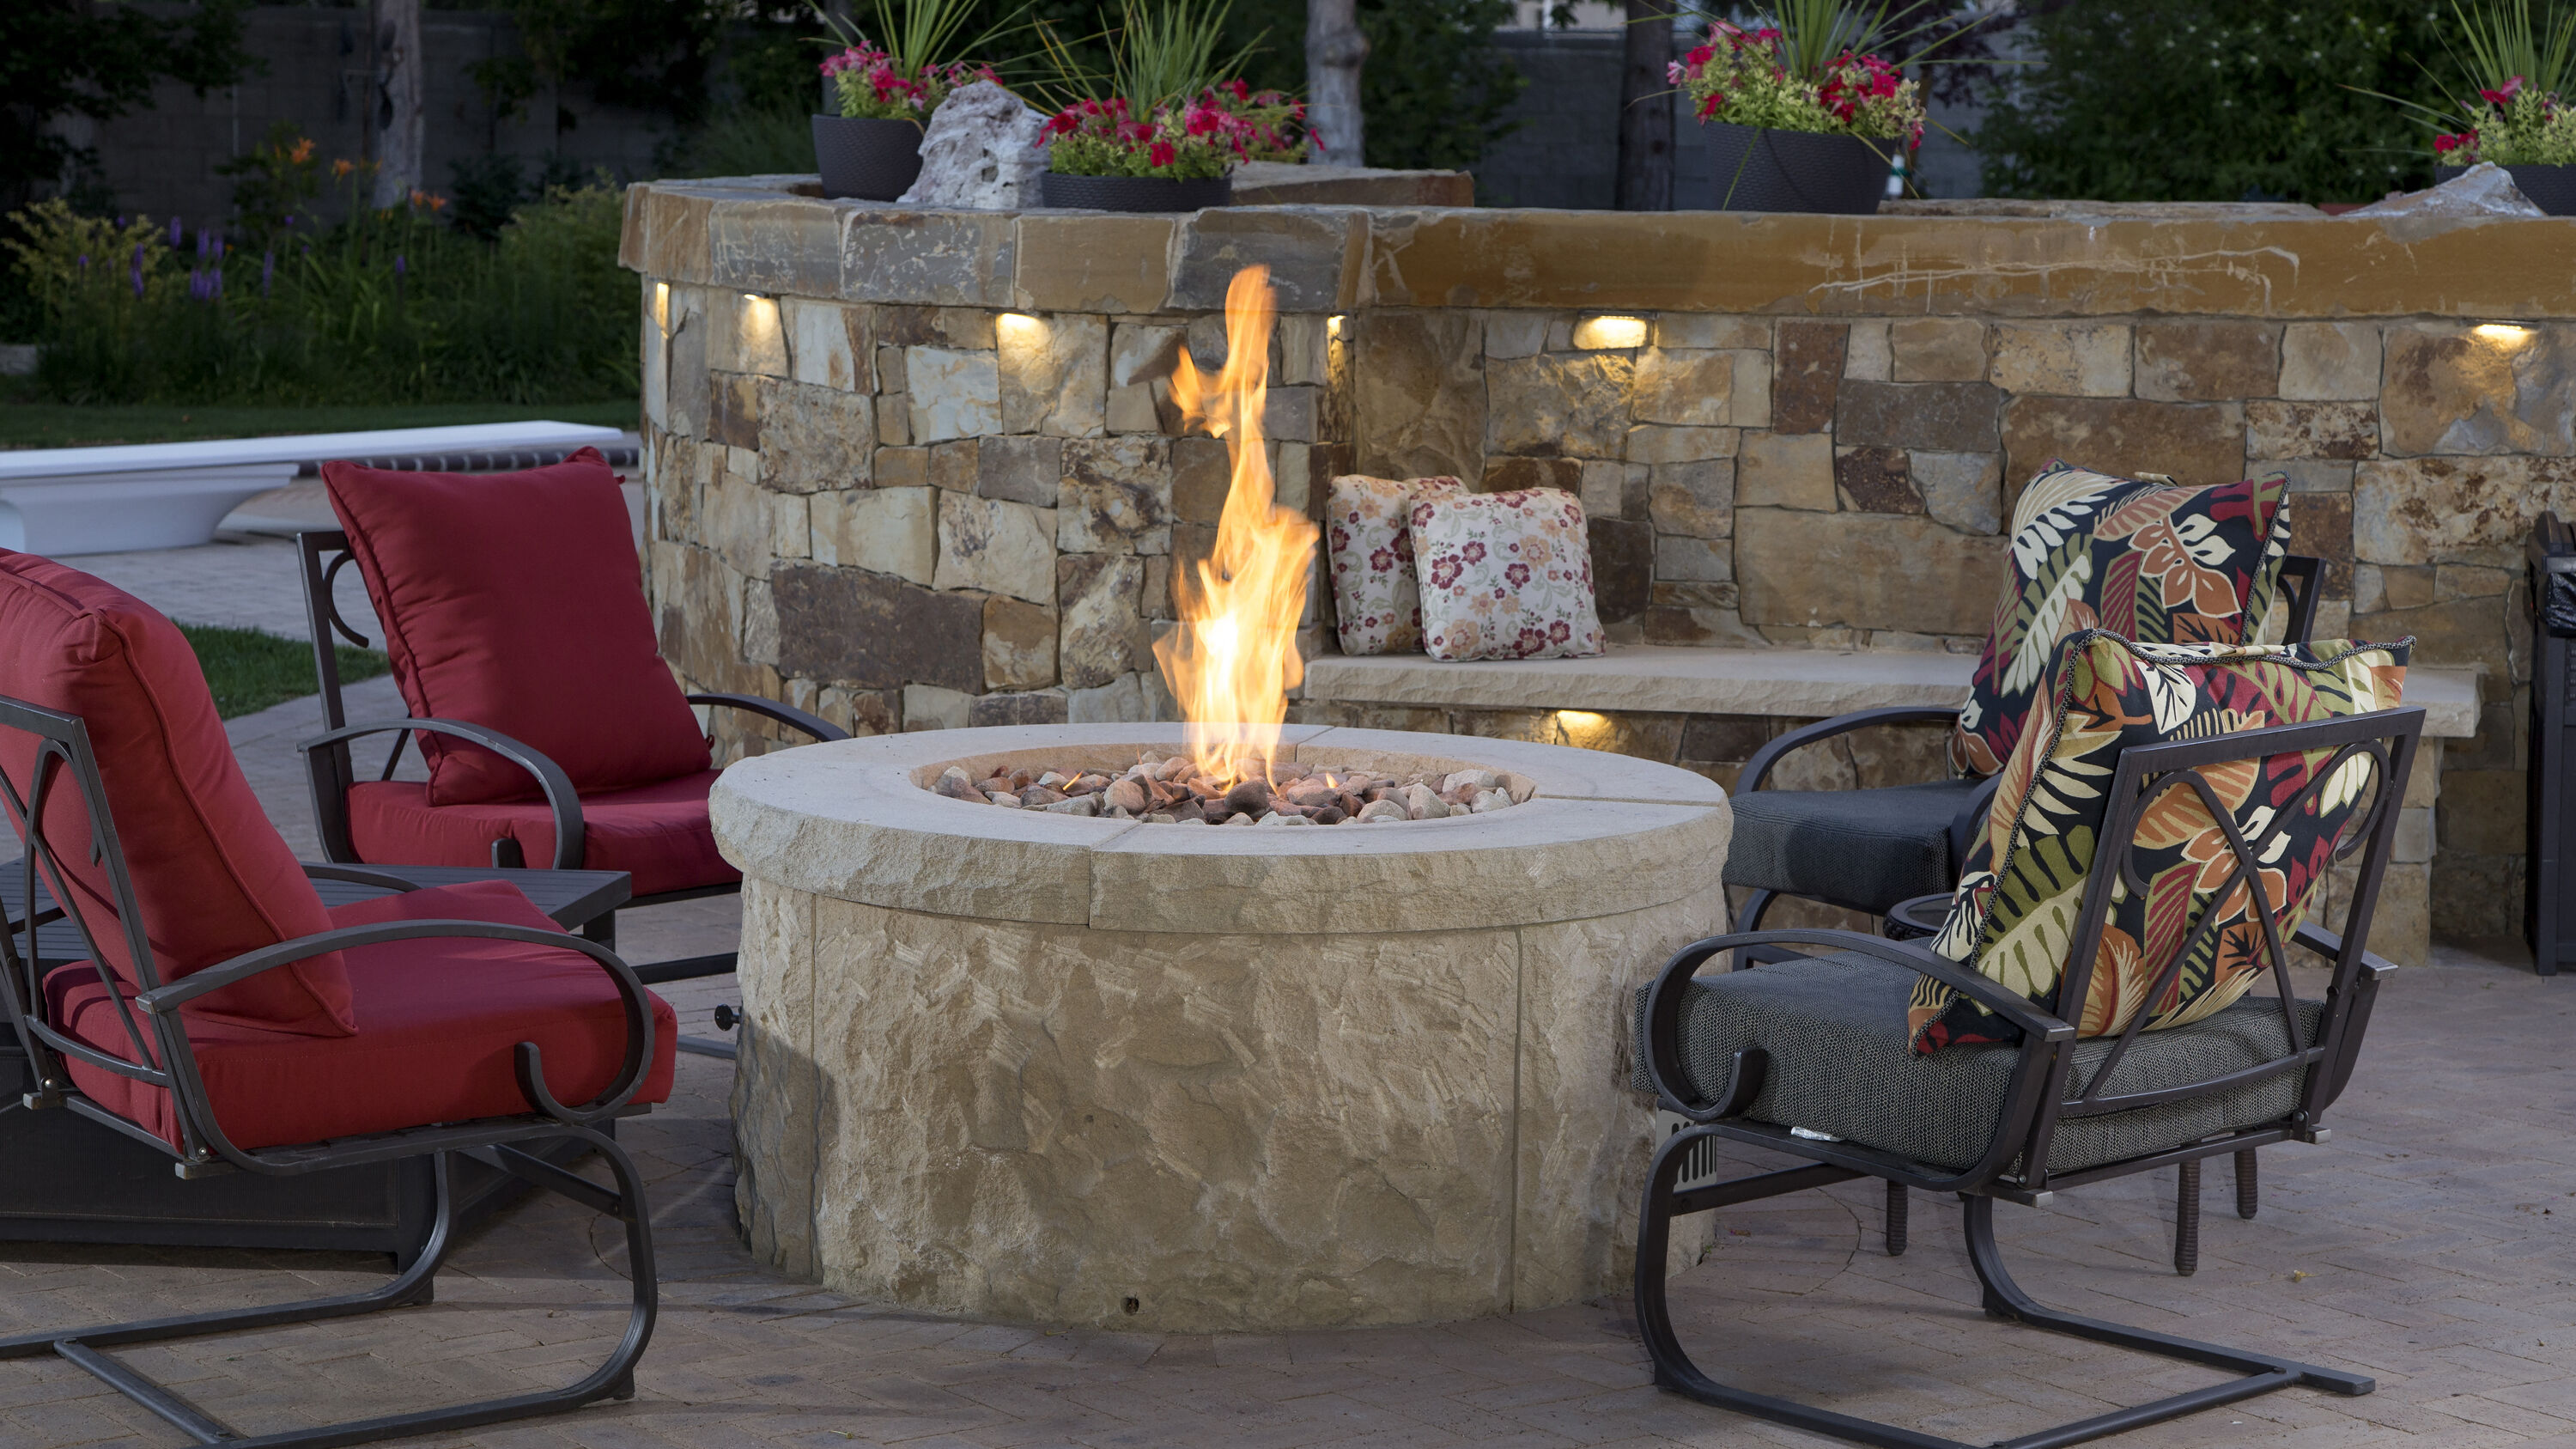 An outdoor patio with three red cushioned lounge chairs and a medium-sized, natural stone gas fire pit with multi-colored river rocks in the media bed.